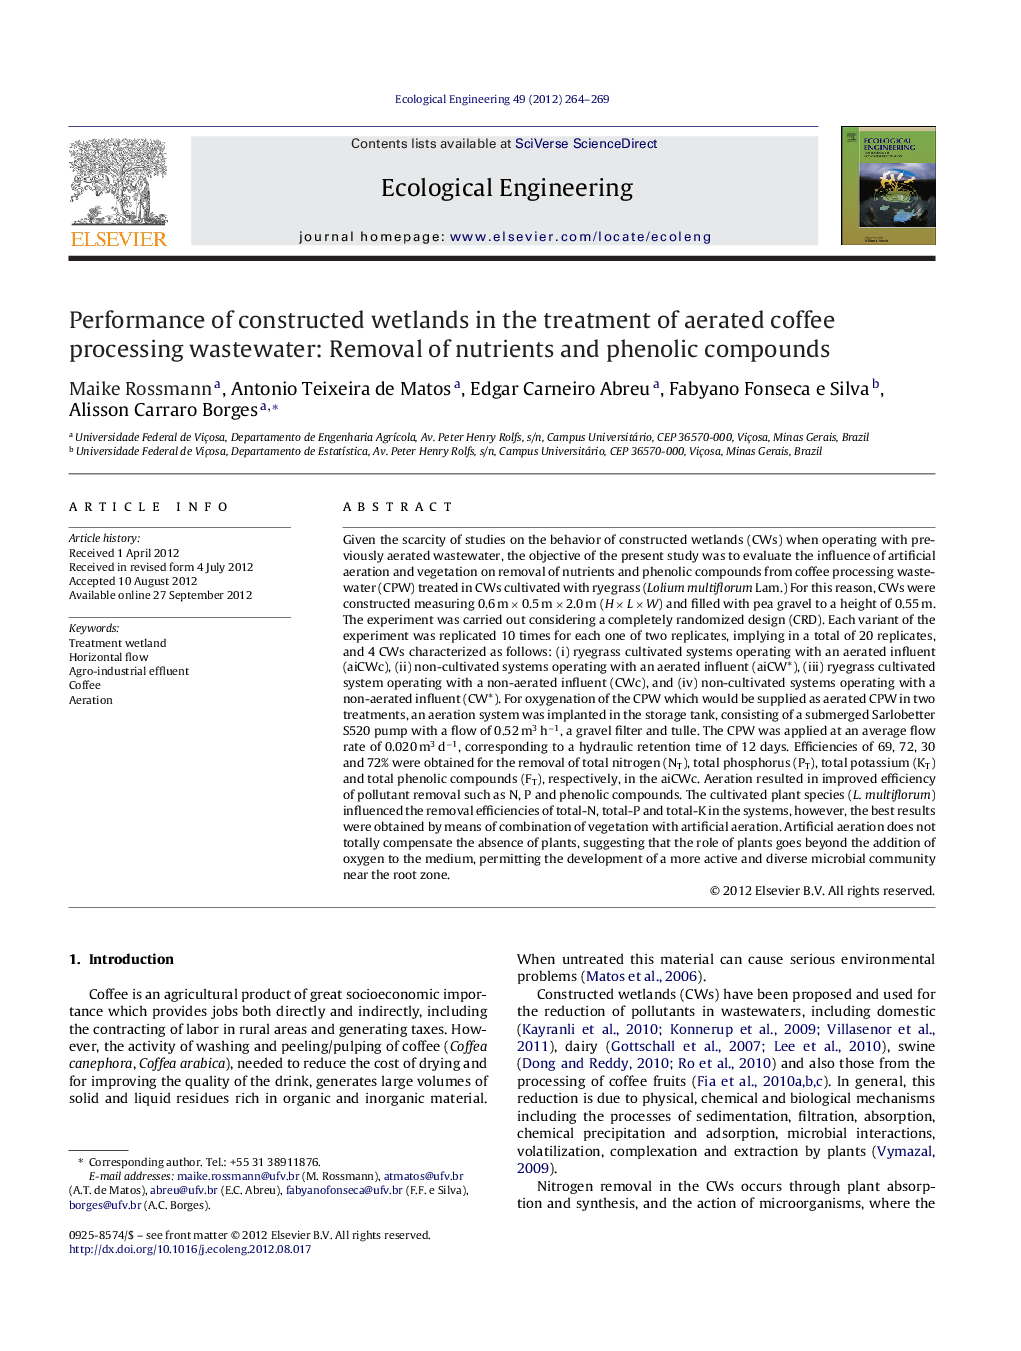 Performance of constructed wetlands in the treatment of aerated coffee processing wastewater: Removal of nutrients and phenolic compounds